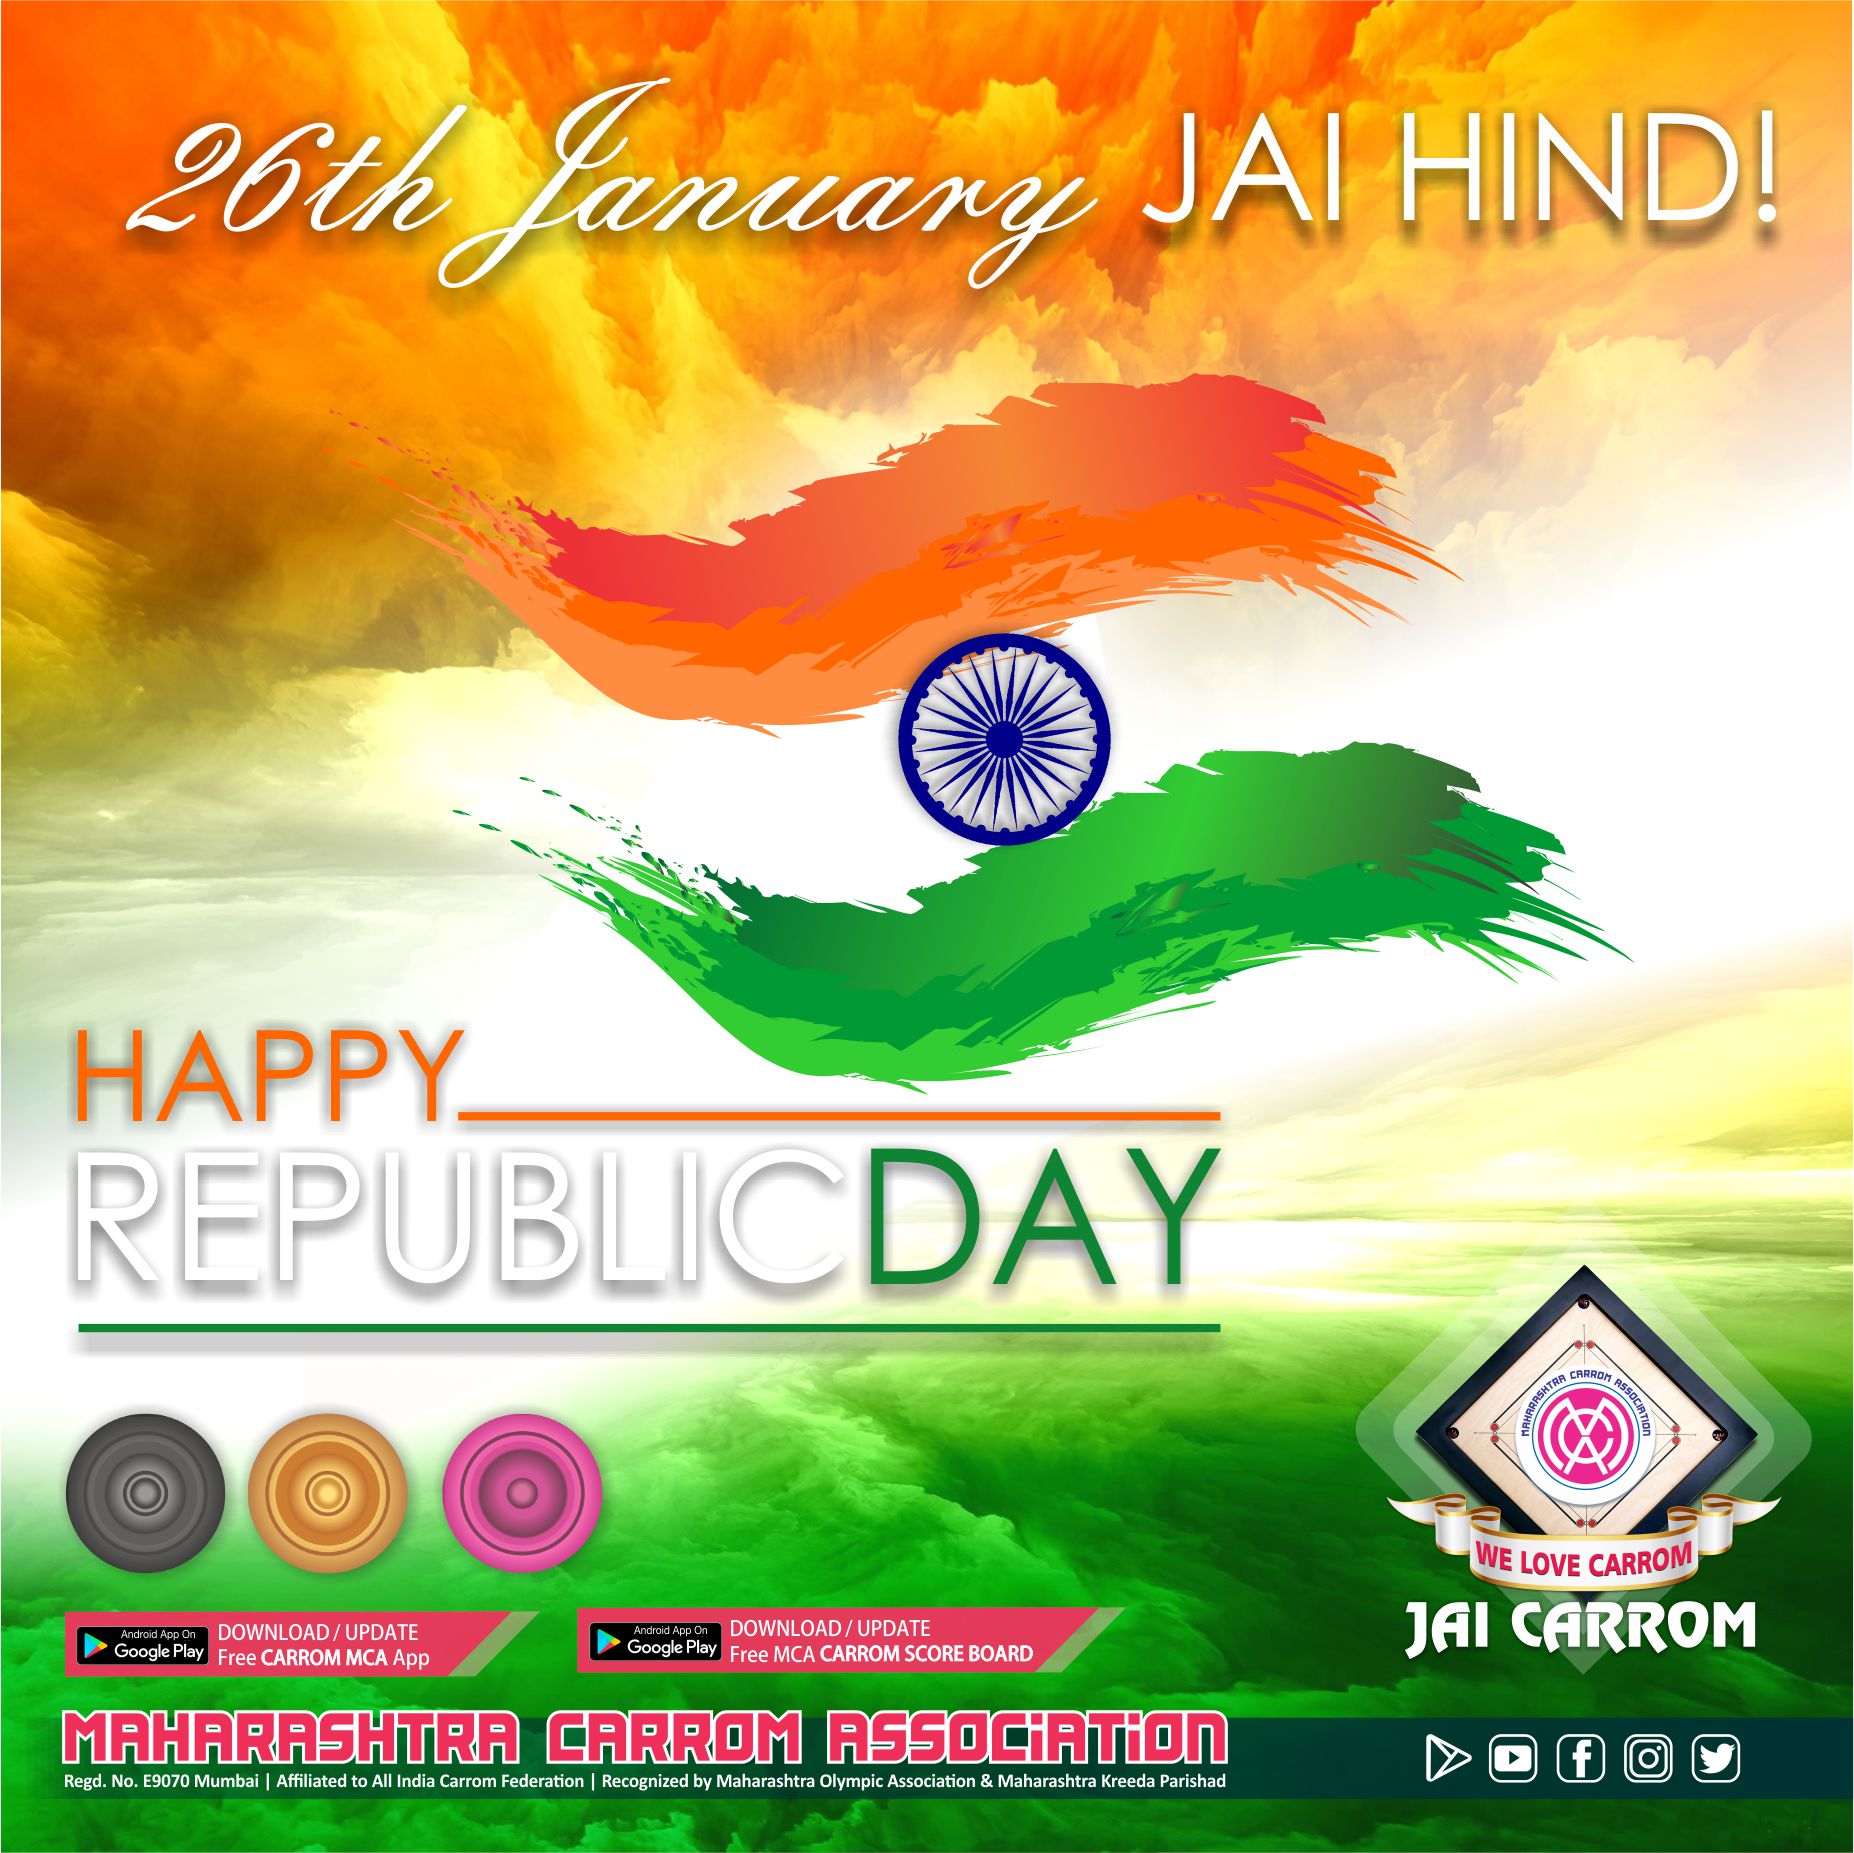 Wishing All of You Happy Republic Day !